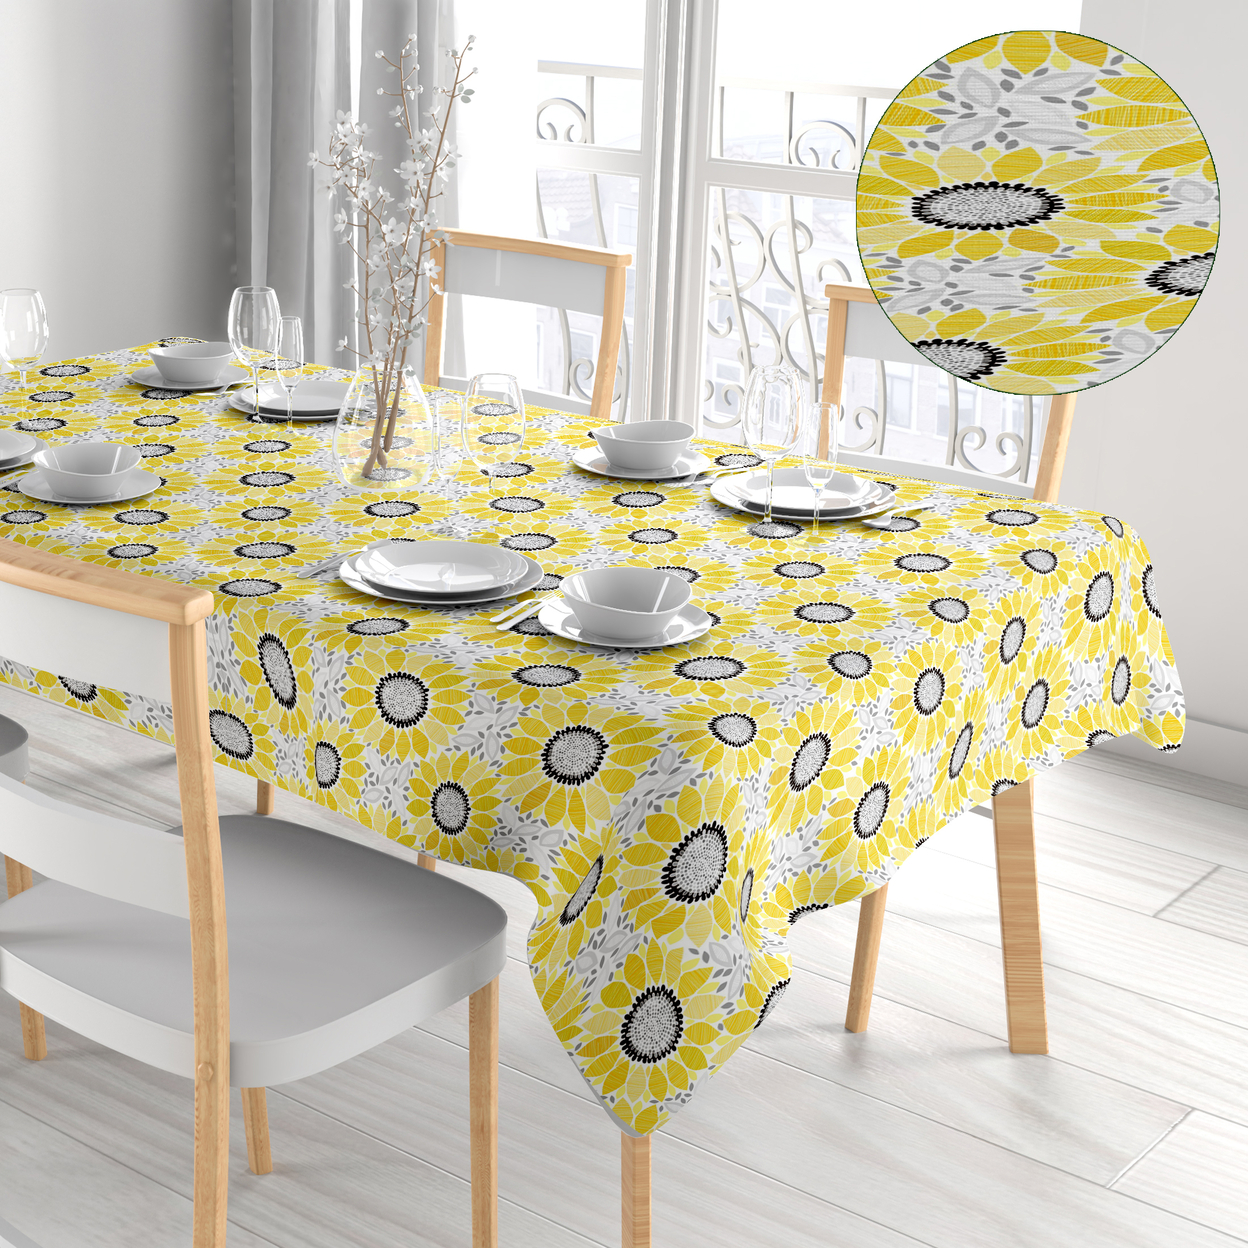 2-Pack: Kitchen Dining Water-Resistant Oil Proof Flannel Back PVC Vinyl Tablecloth - 60'' Round, Solid